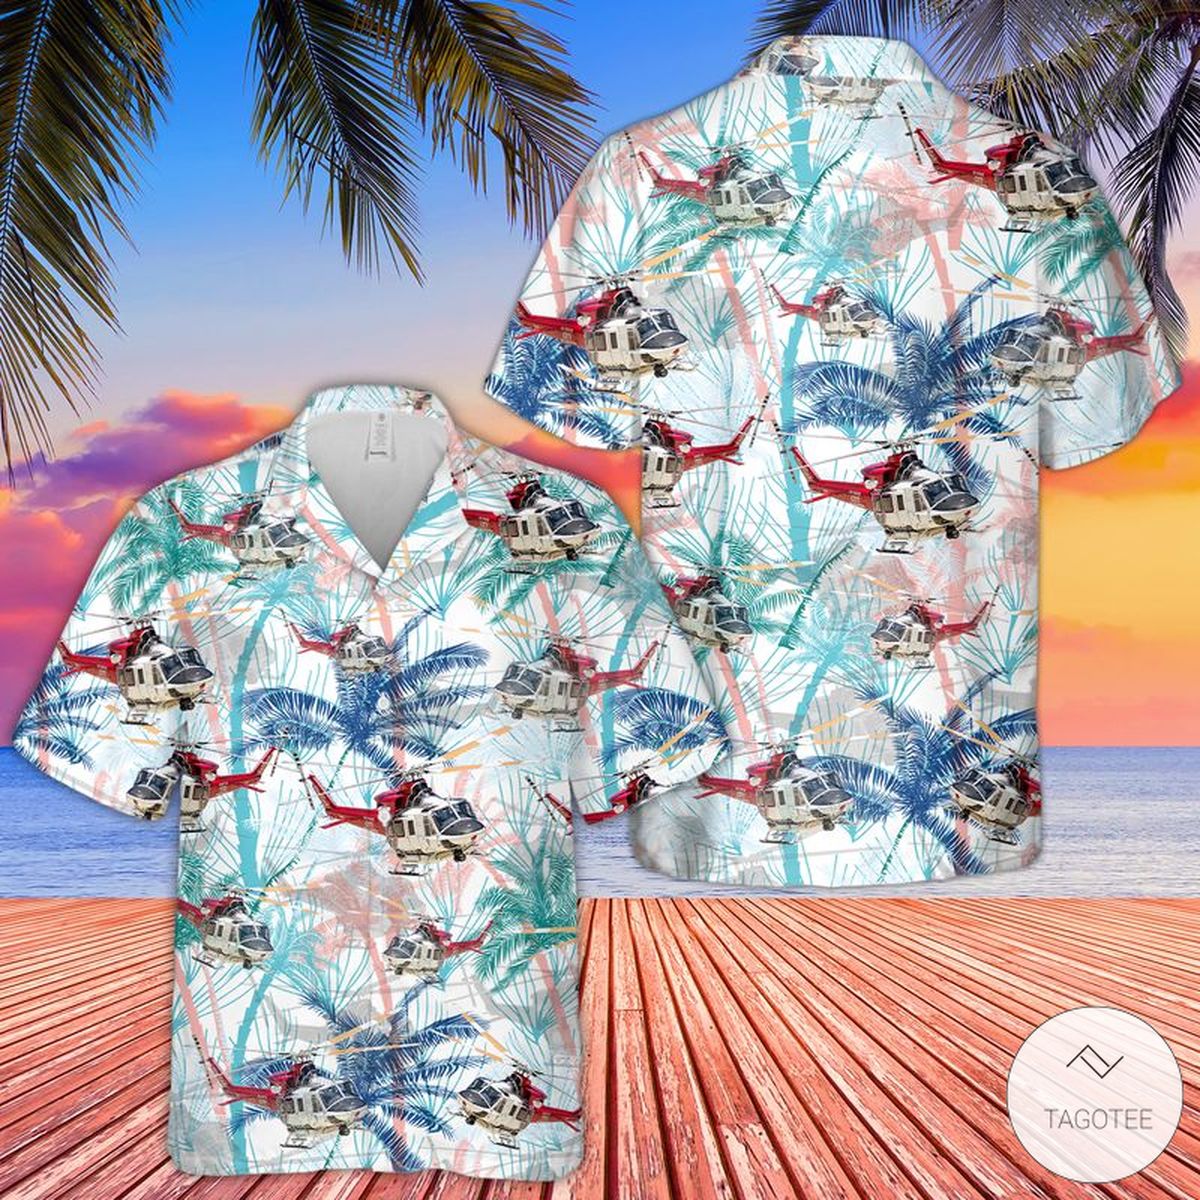 Bell 412ep Of The Los Angeles City Fire Department Hawaiian Shirts For ...